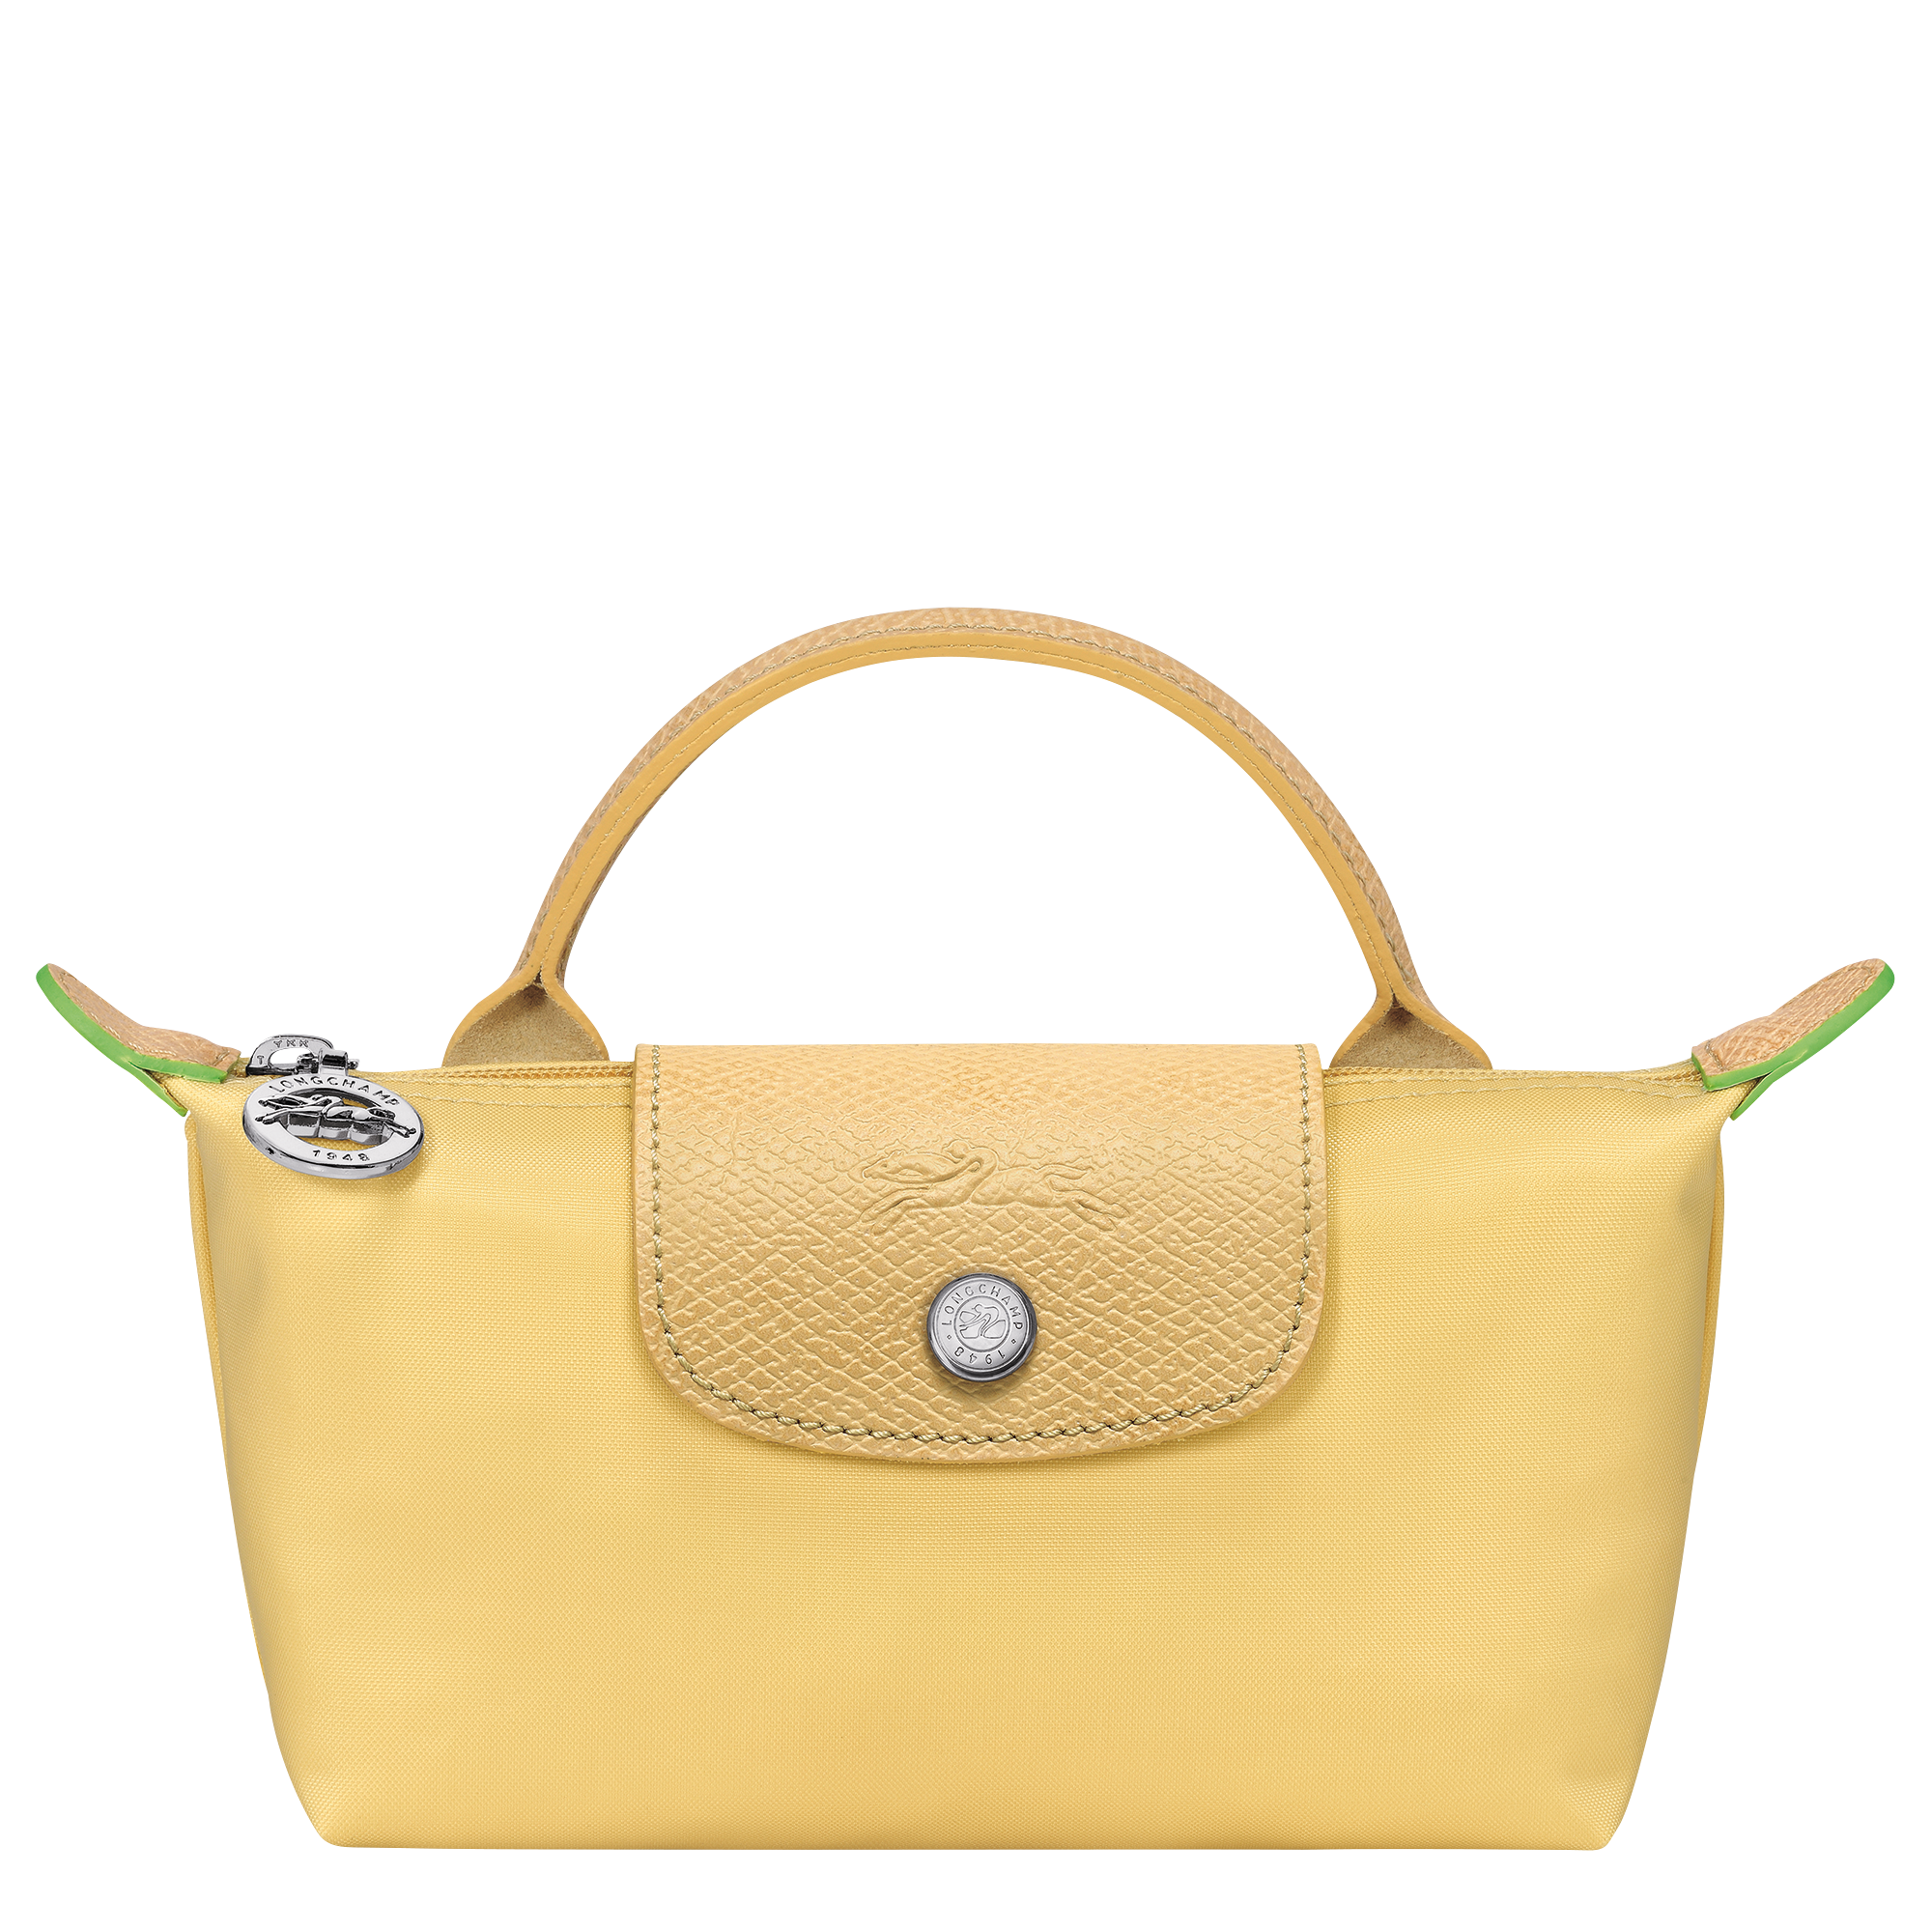 Longchamp LE PLIAGE GREEN - Pouch with handle in Wheat - 1 (SKU: 34175919A81)